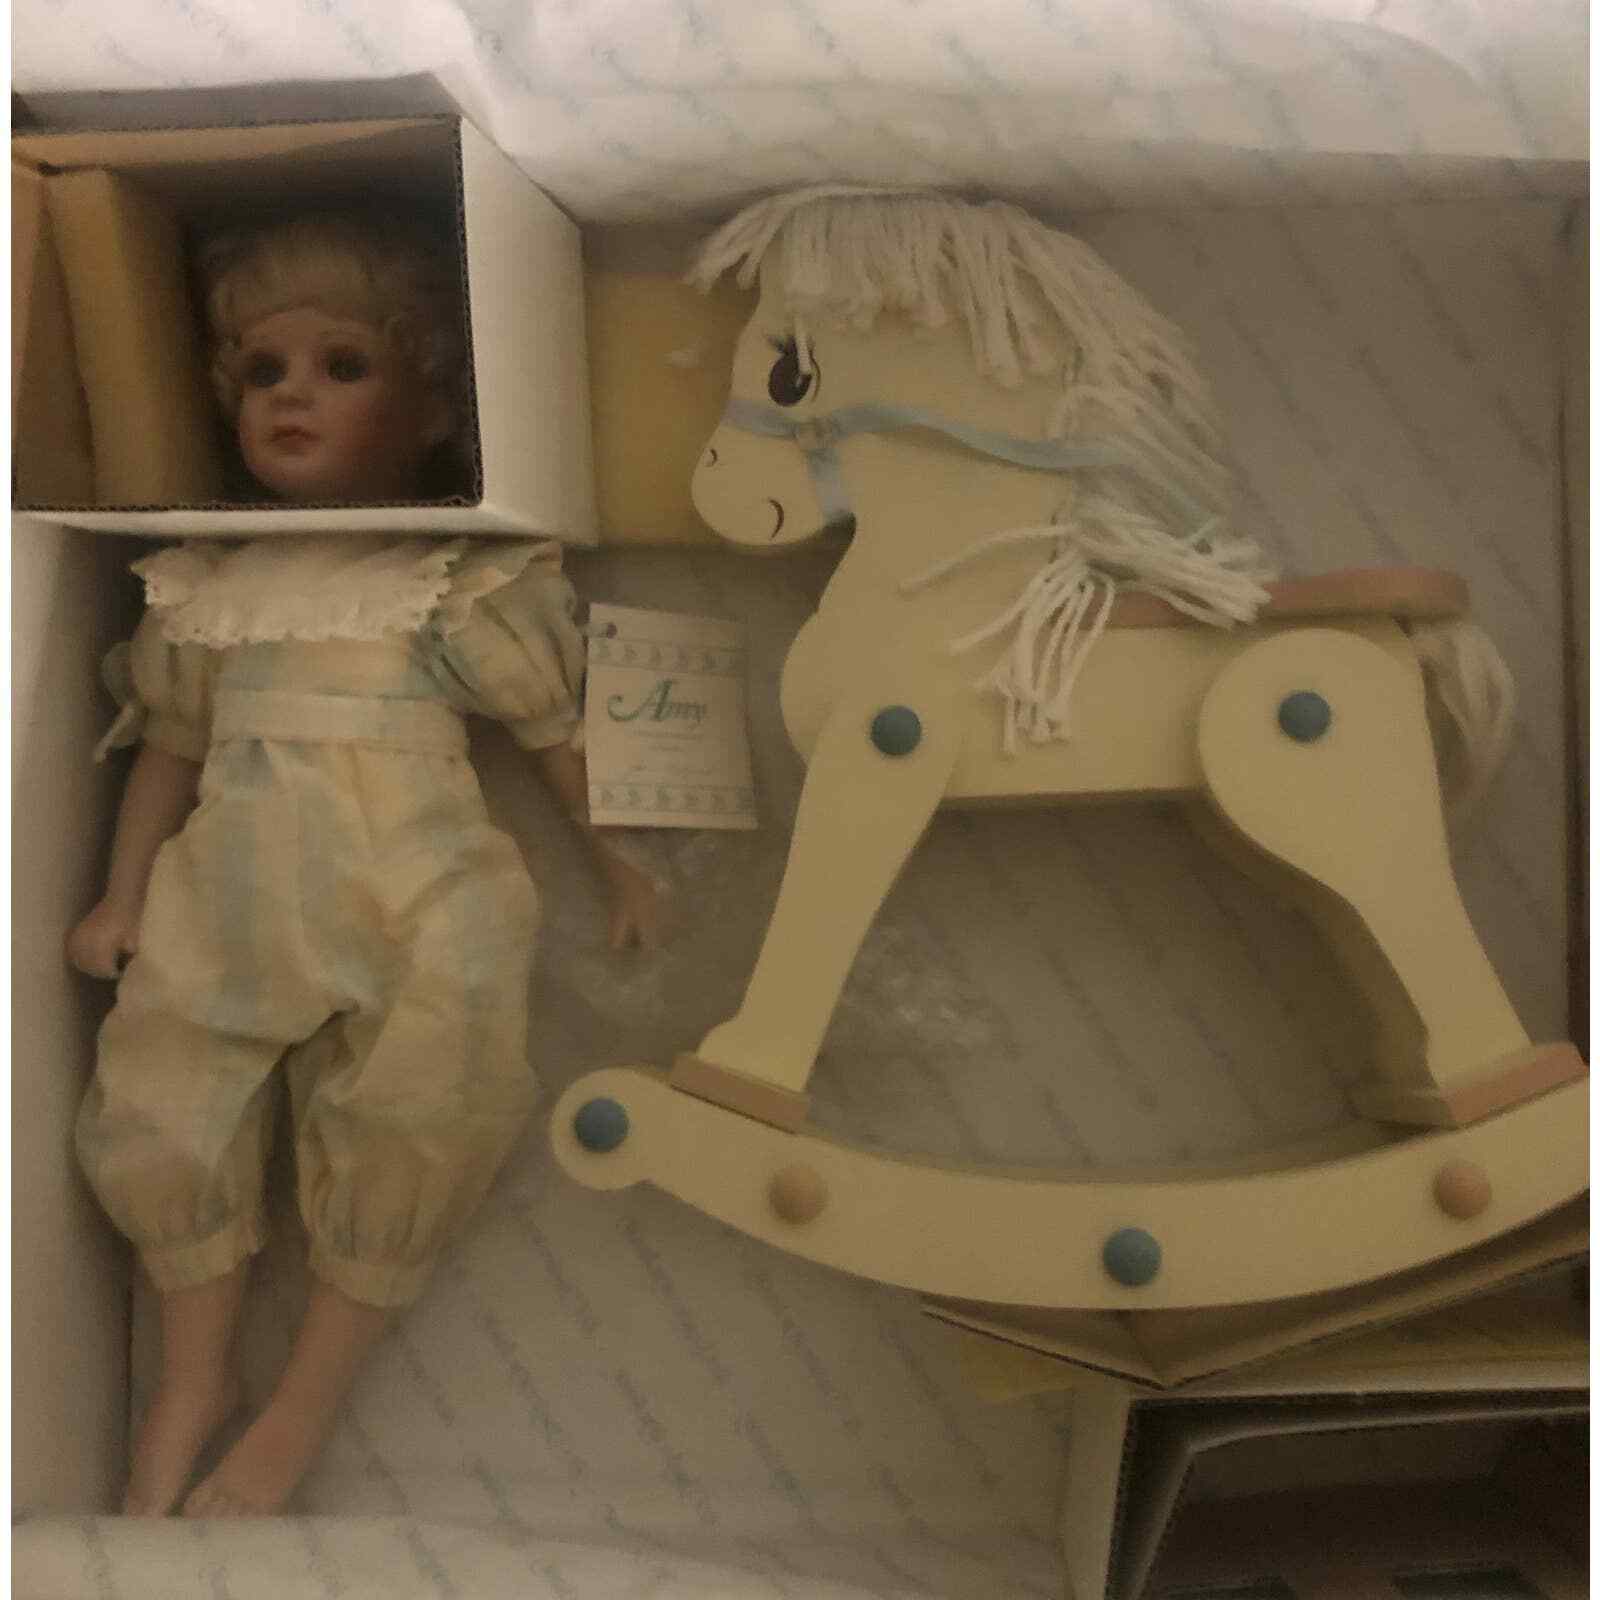 The Hamilton Heritage Porcelain Doll "amy" With Wooden Rocking Horse- Mint Iob